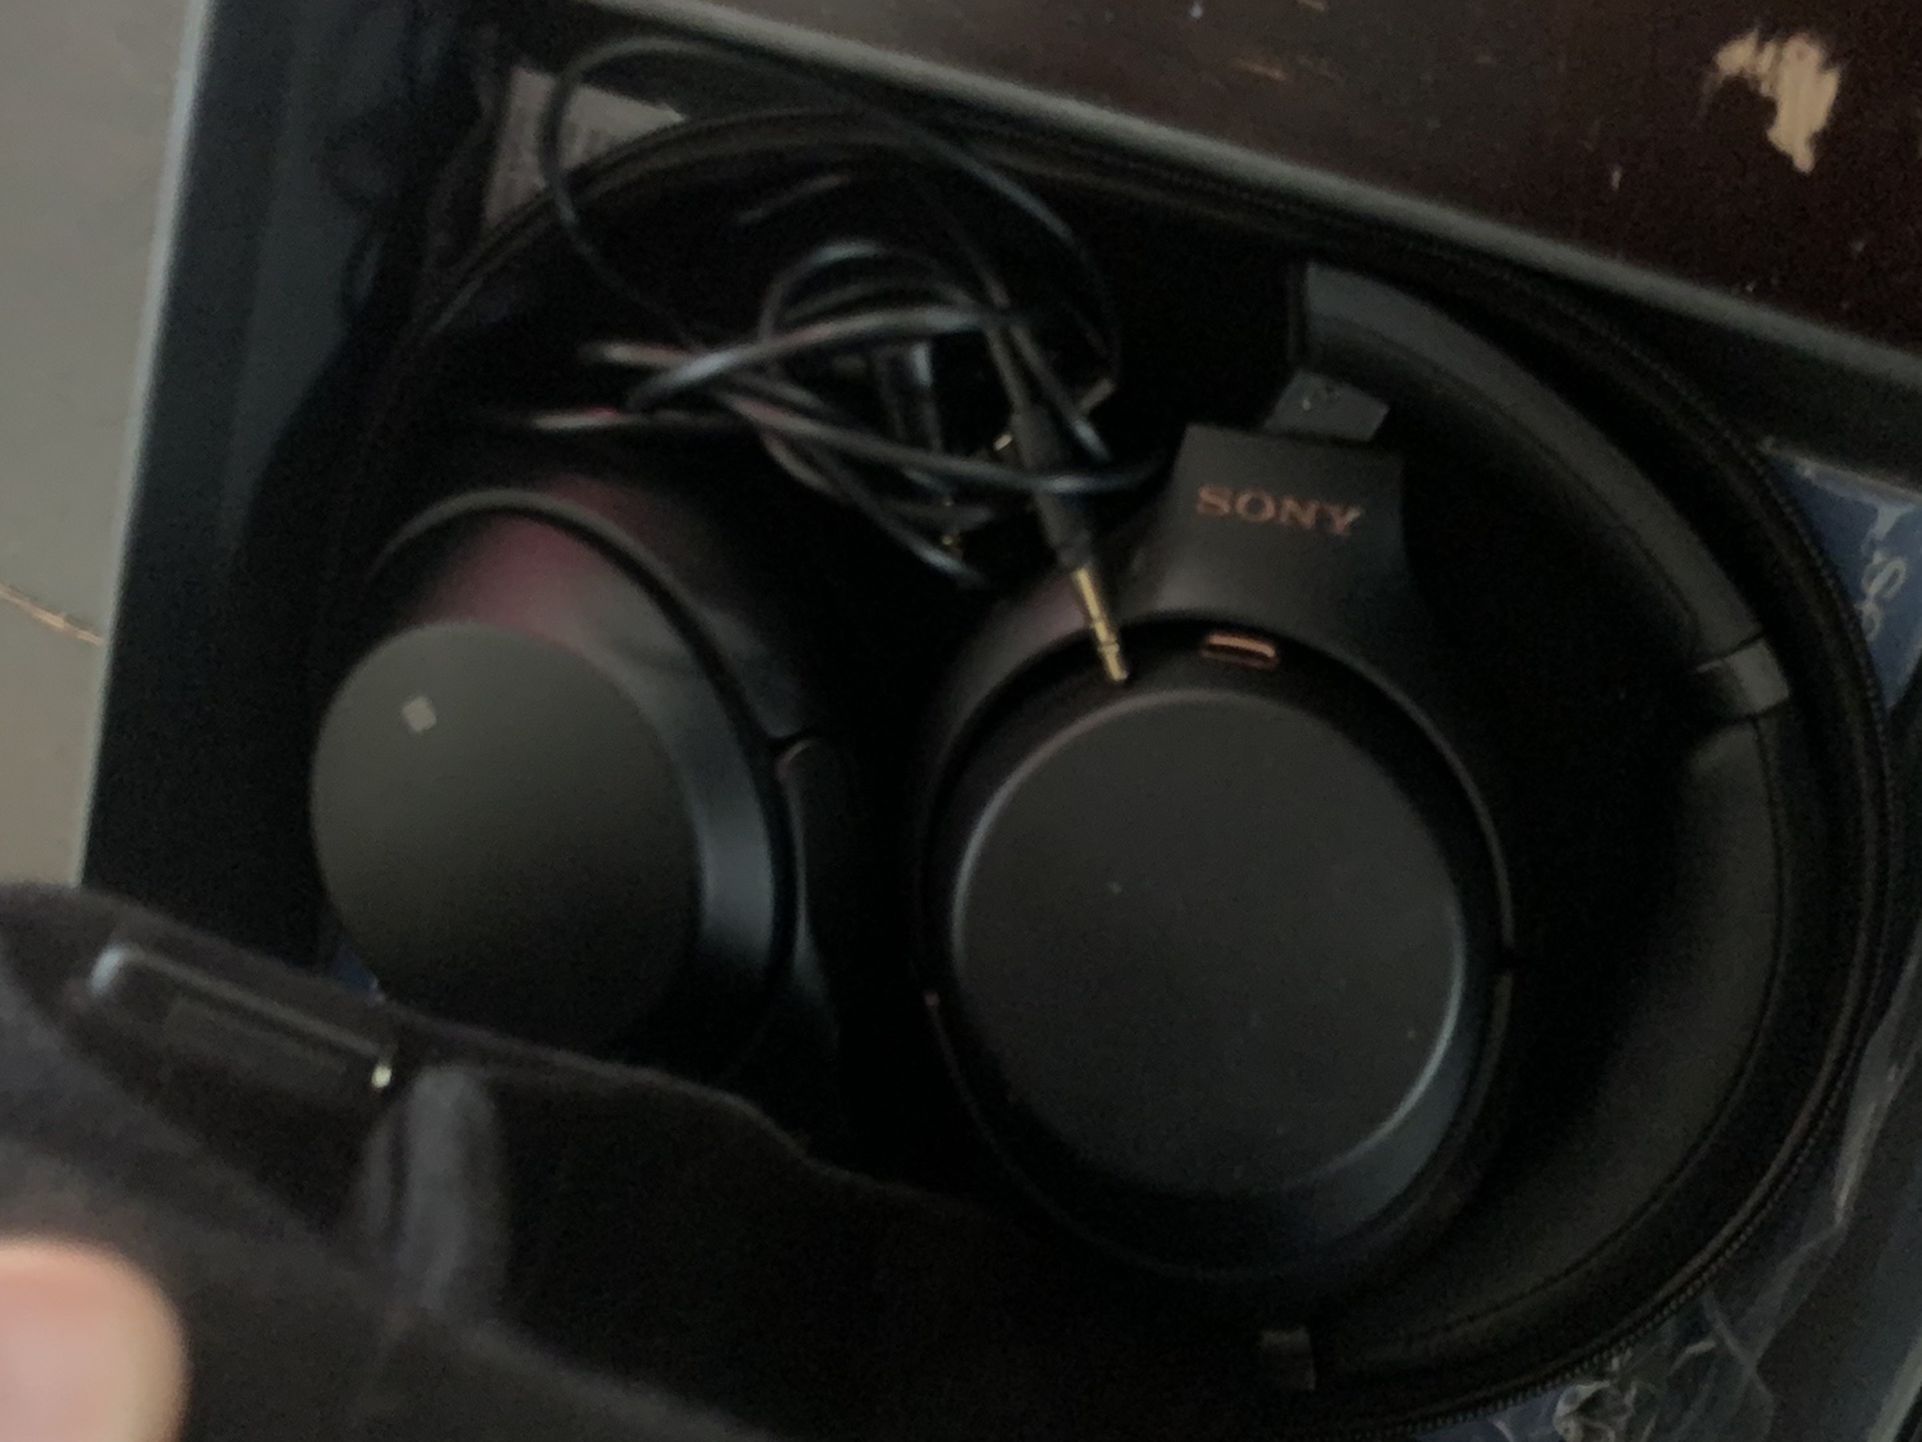 Sony WH-1000XM3 Wireless Noise-Cancelling Over-Ear Headphones